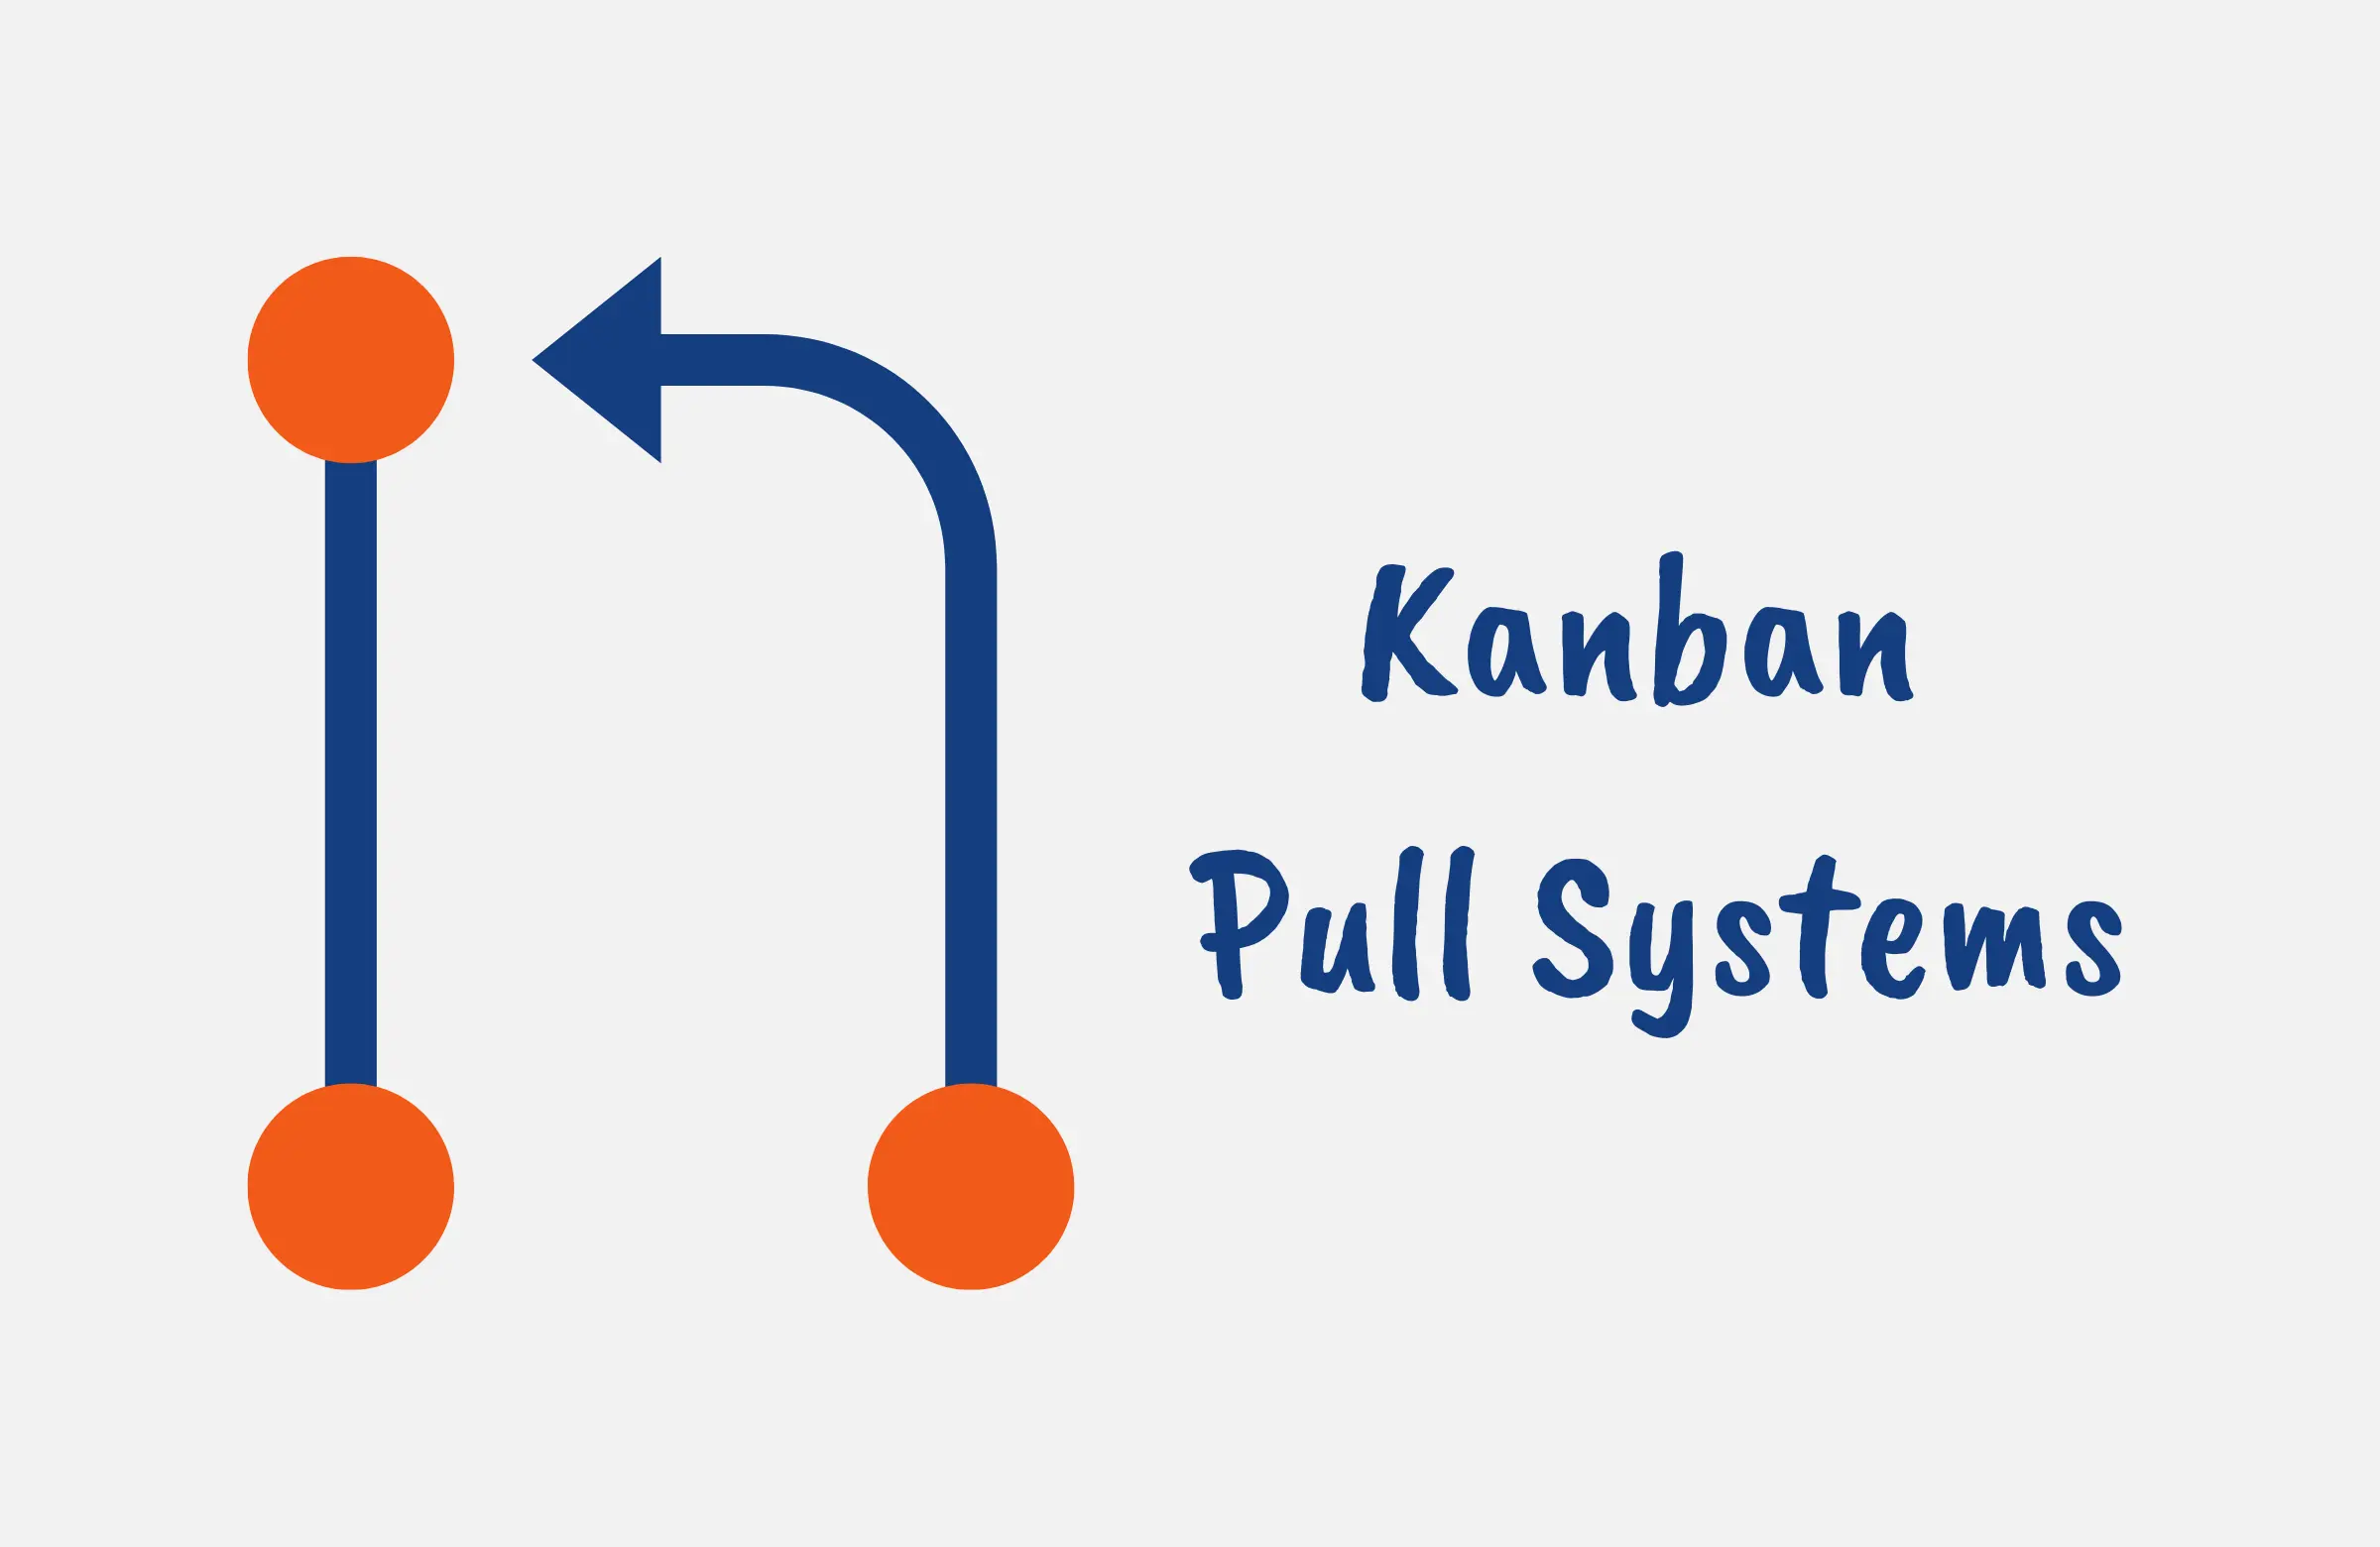 What is a Kanban Pull System